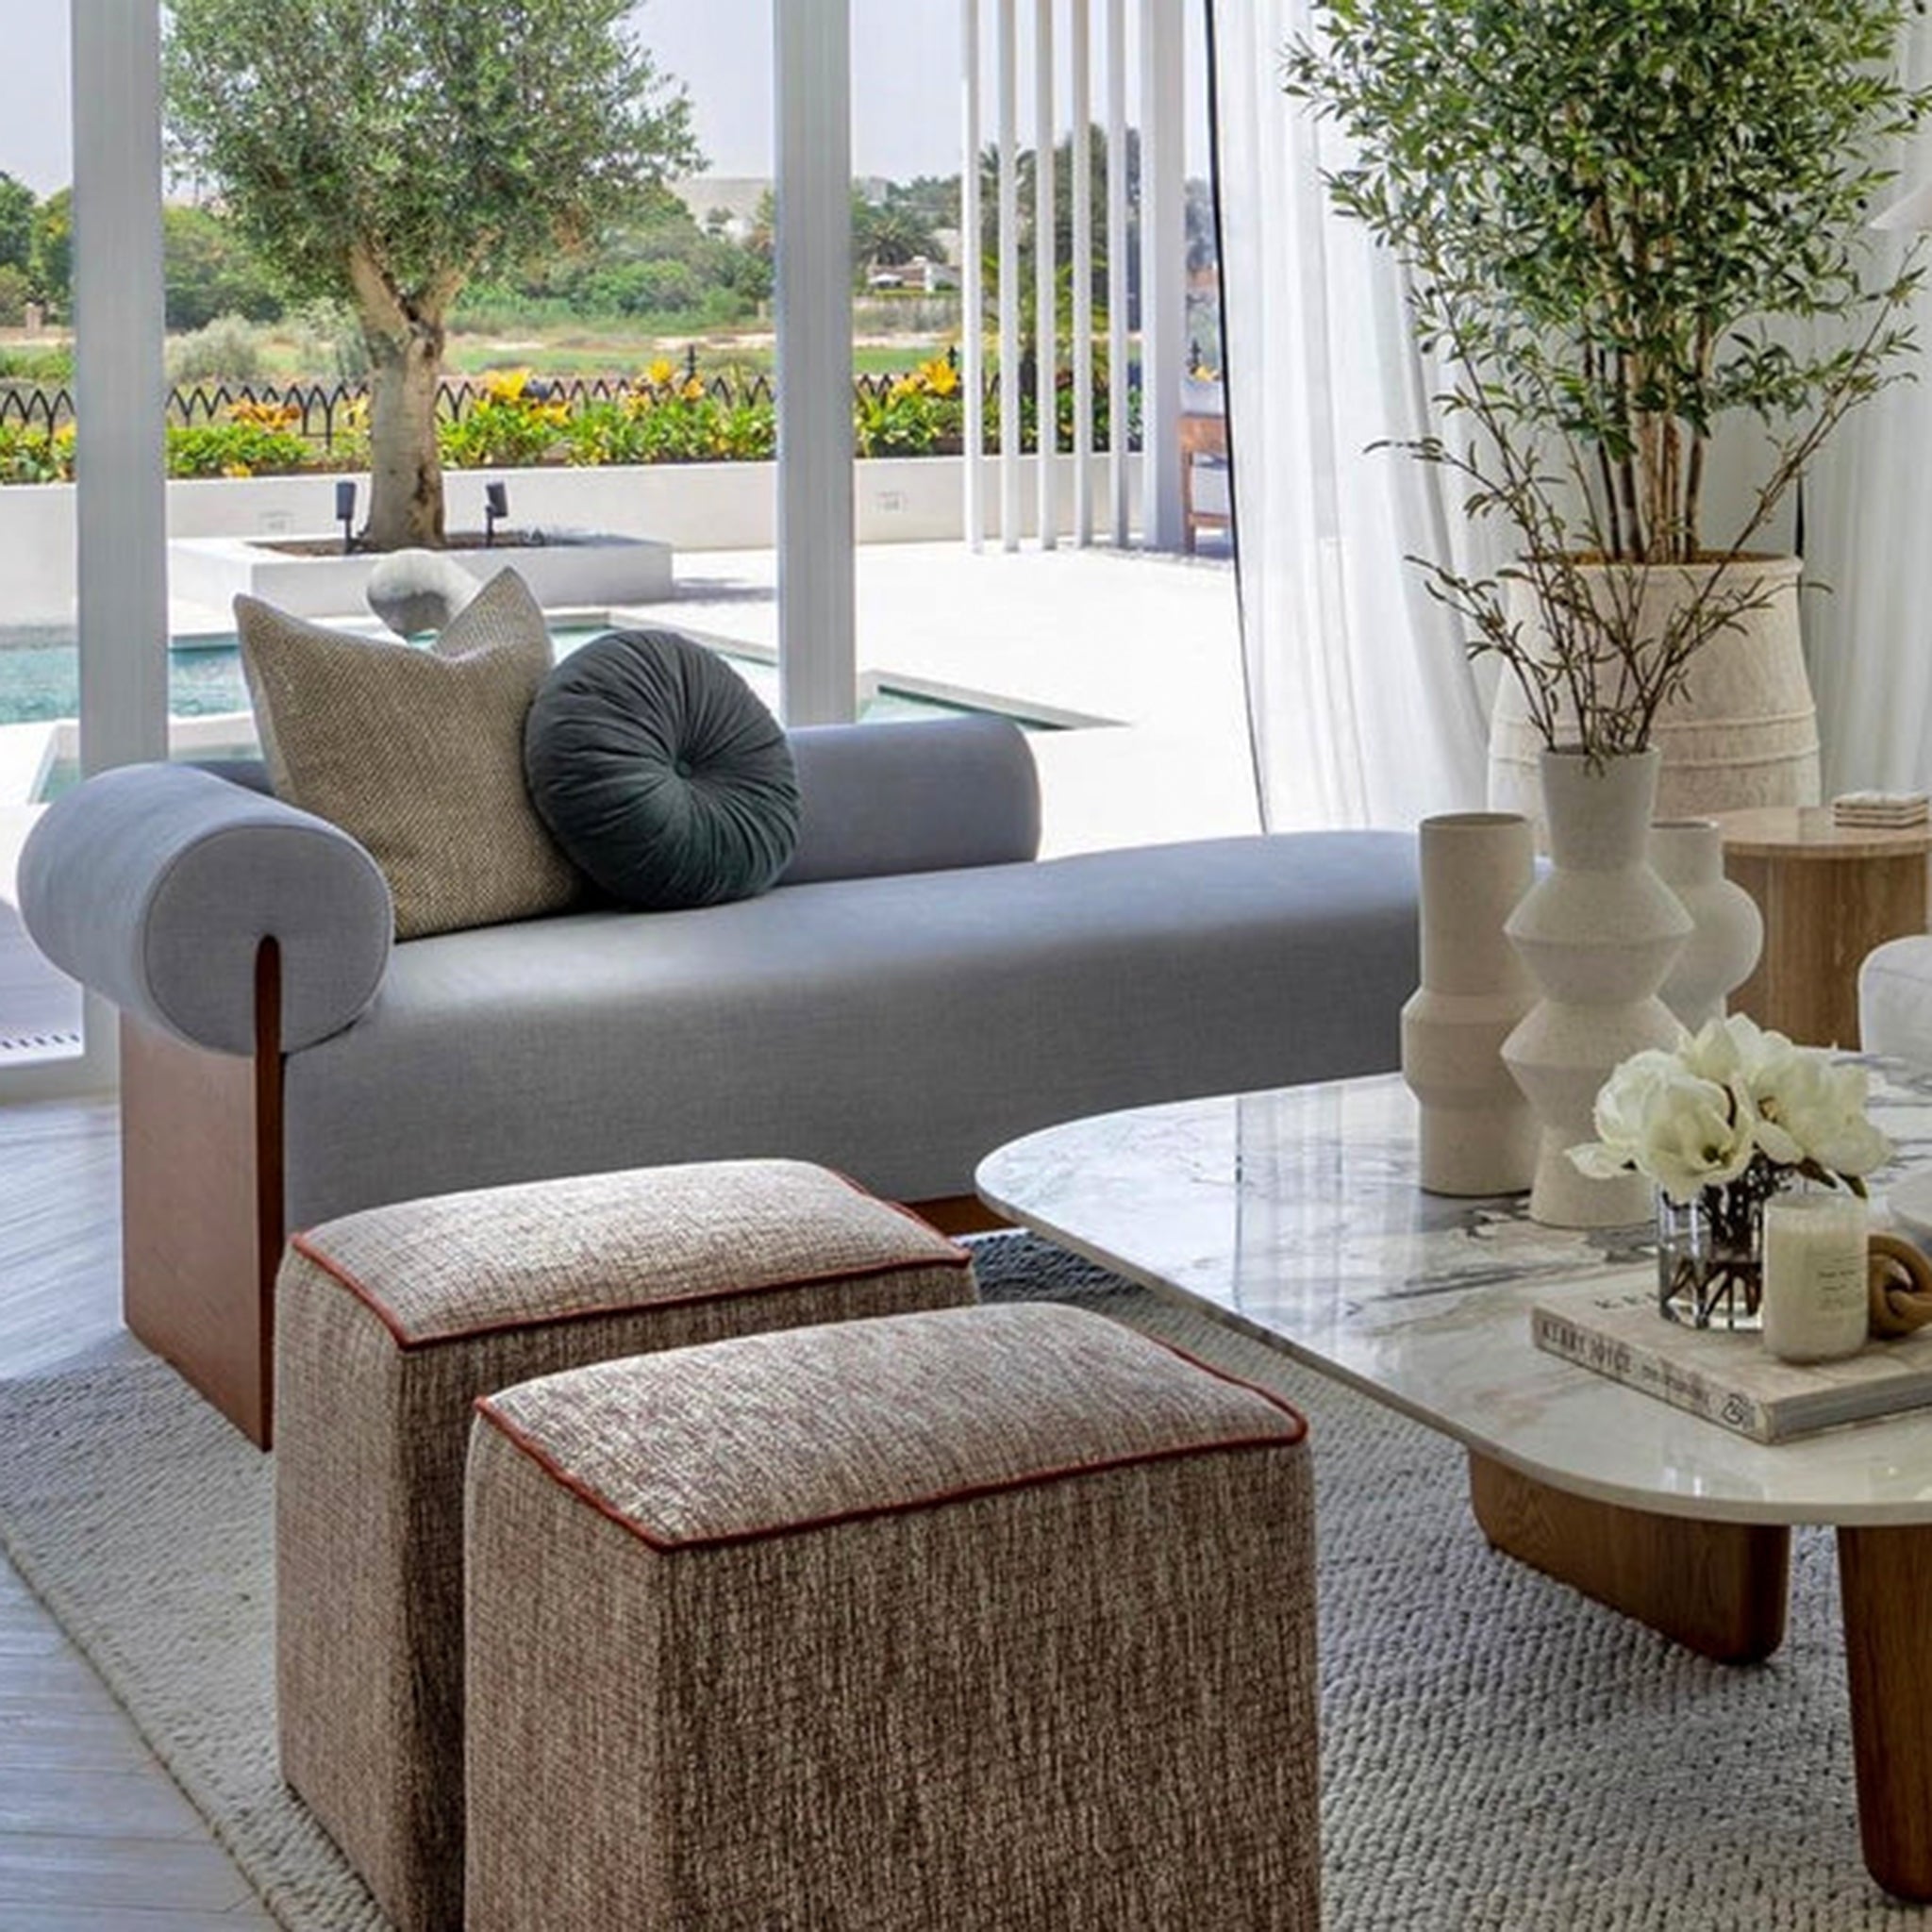 The Devon Chaise in a modern living room with a grey upholstered seat and wooden frame, positioned by large windows overlooking a garden and pool, complemented by decorative pillows and a stylish coffee table with vases and flowers.